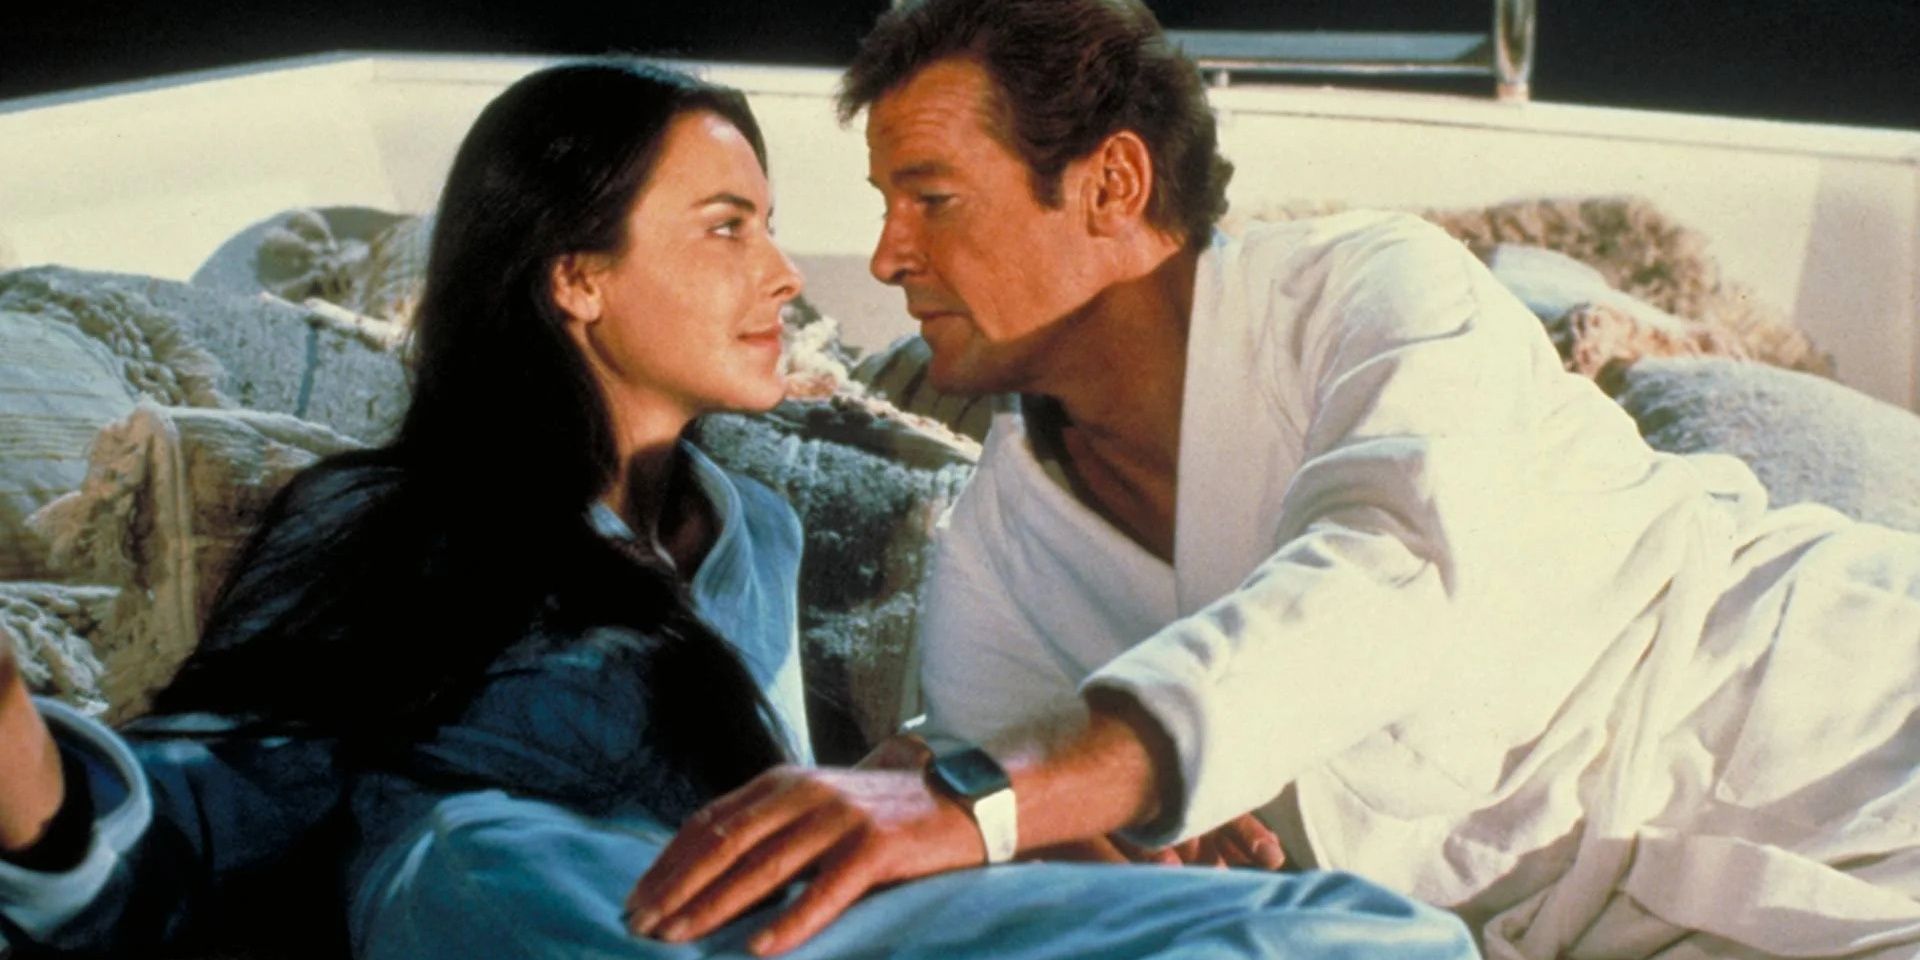 Roger Moore, james bond, 007, Carole Bouquet in bed, For Your Eyes Only, age gap